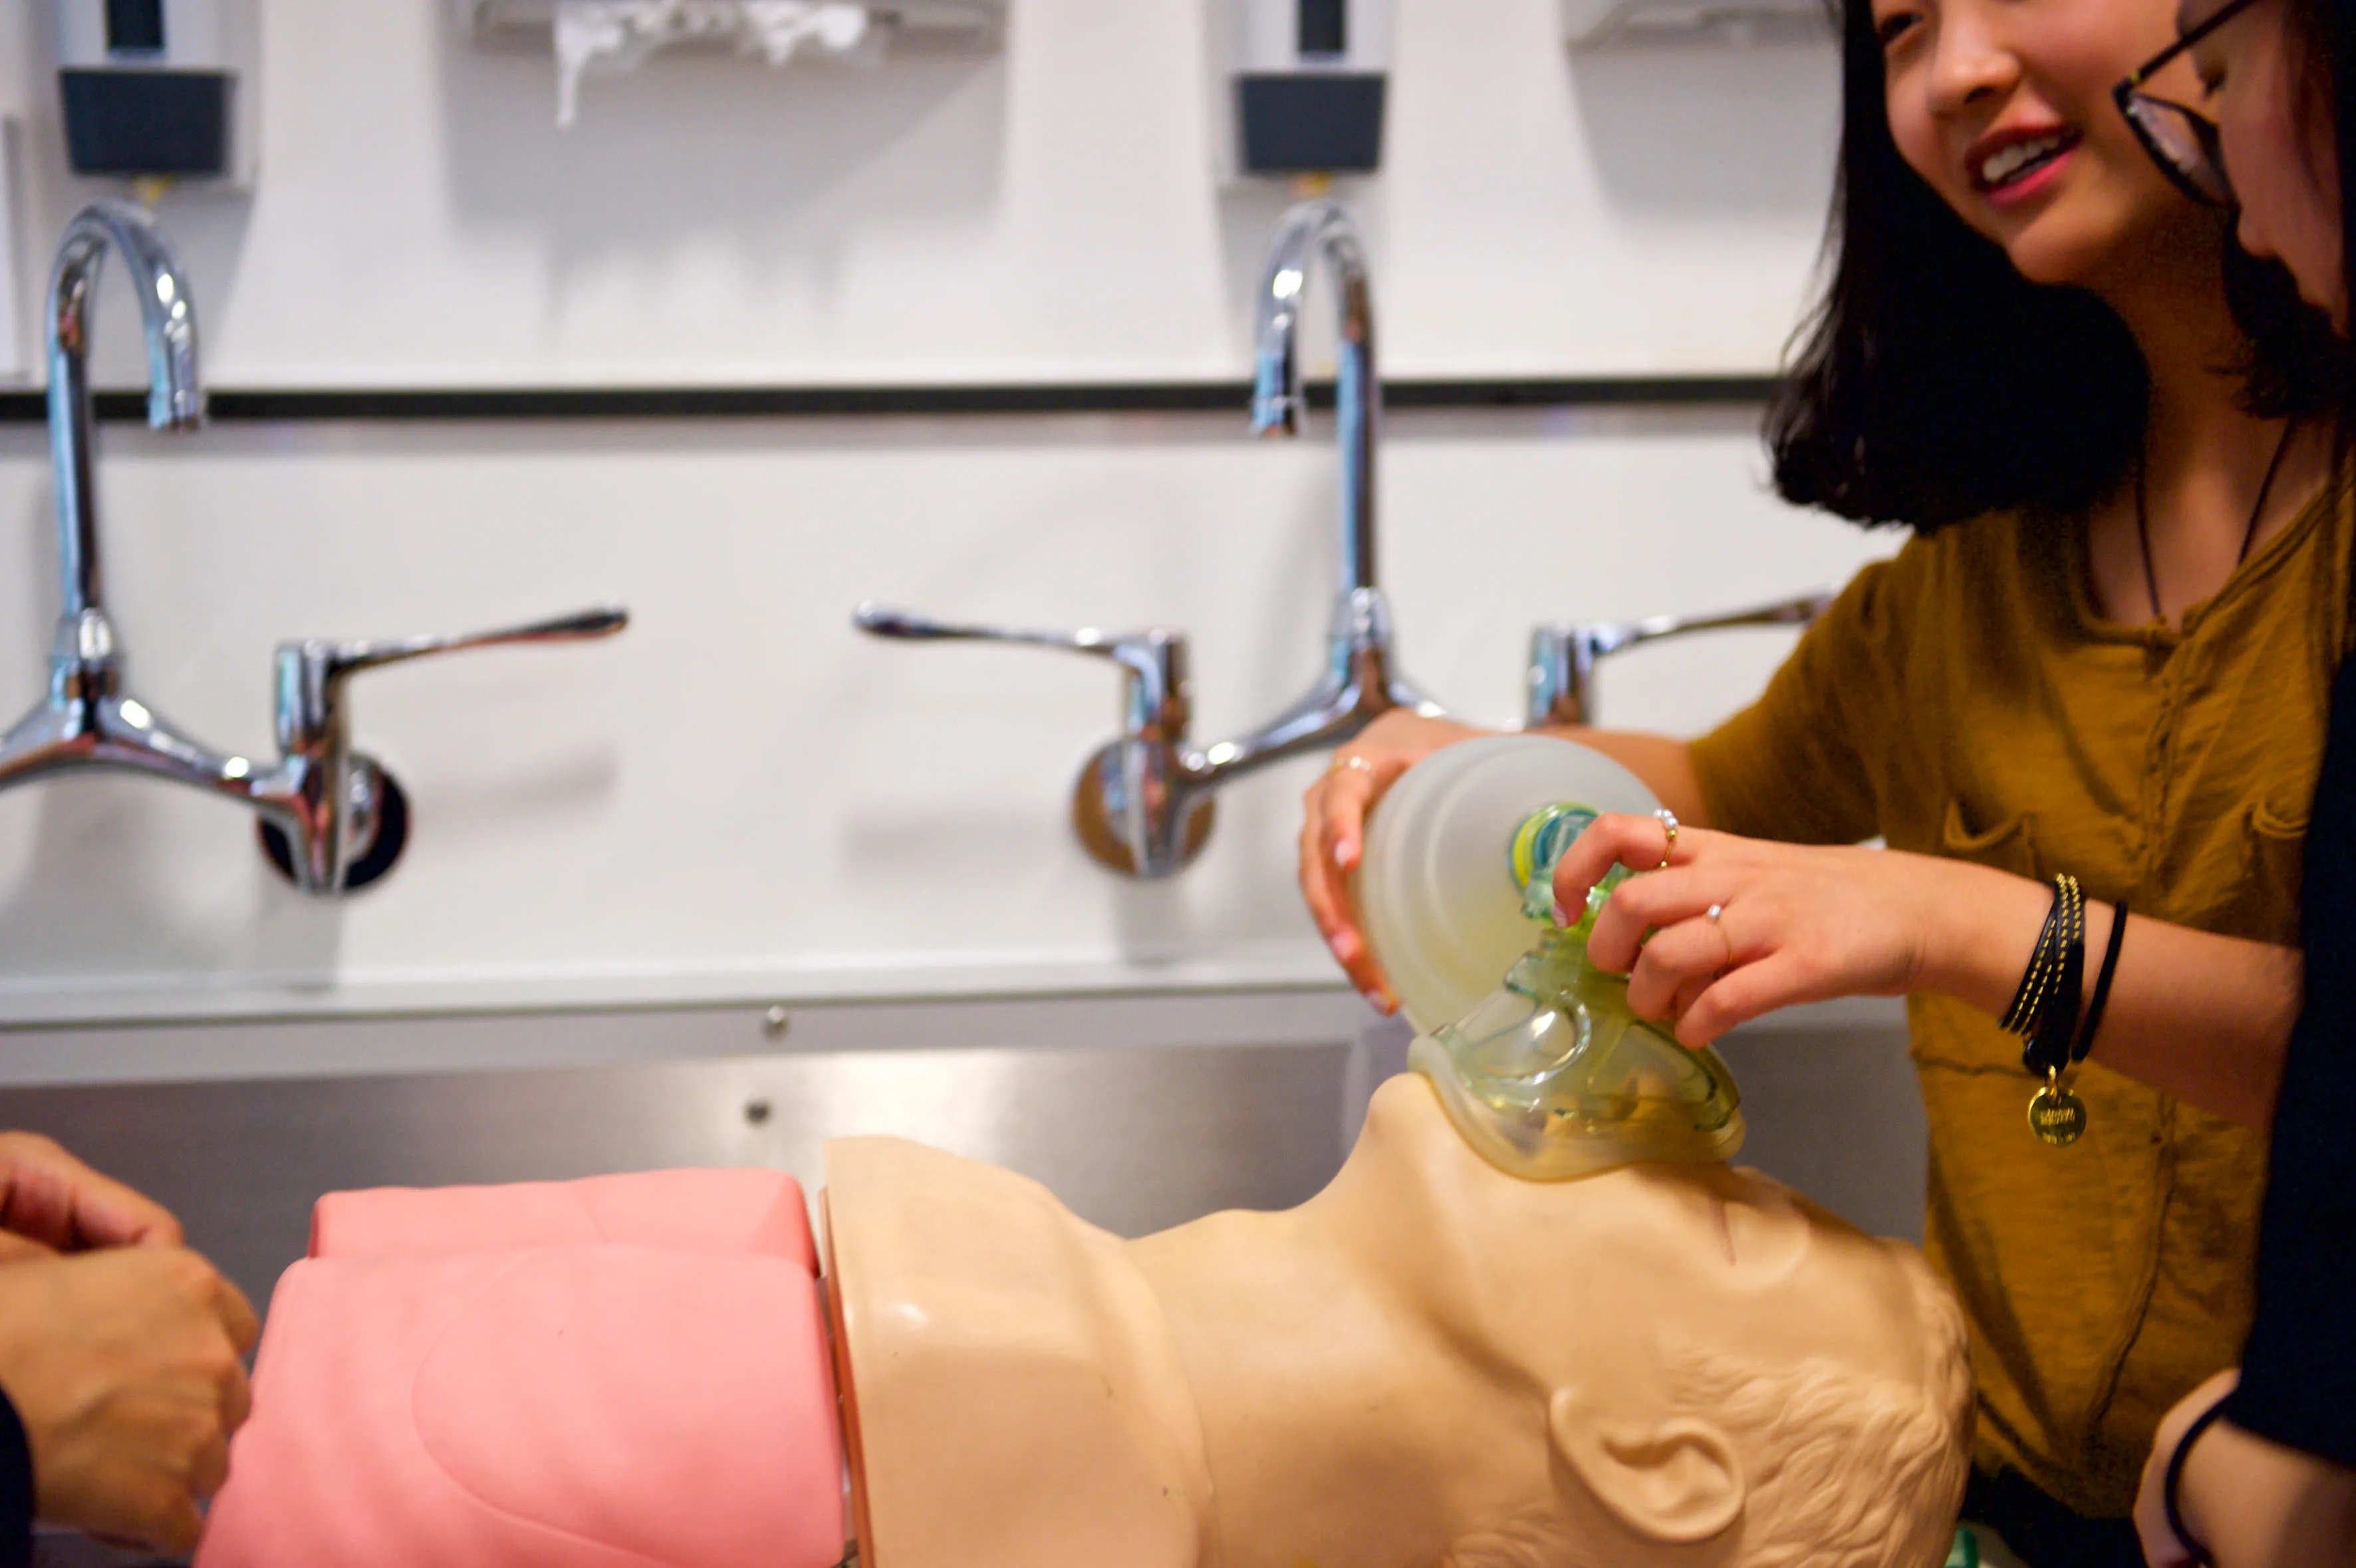 medical students practicing ventilation techniques on a training manikin